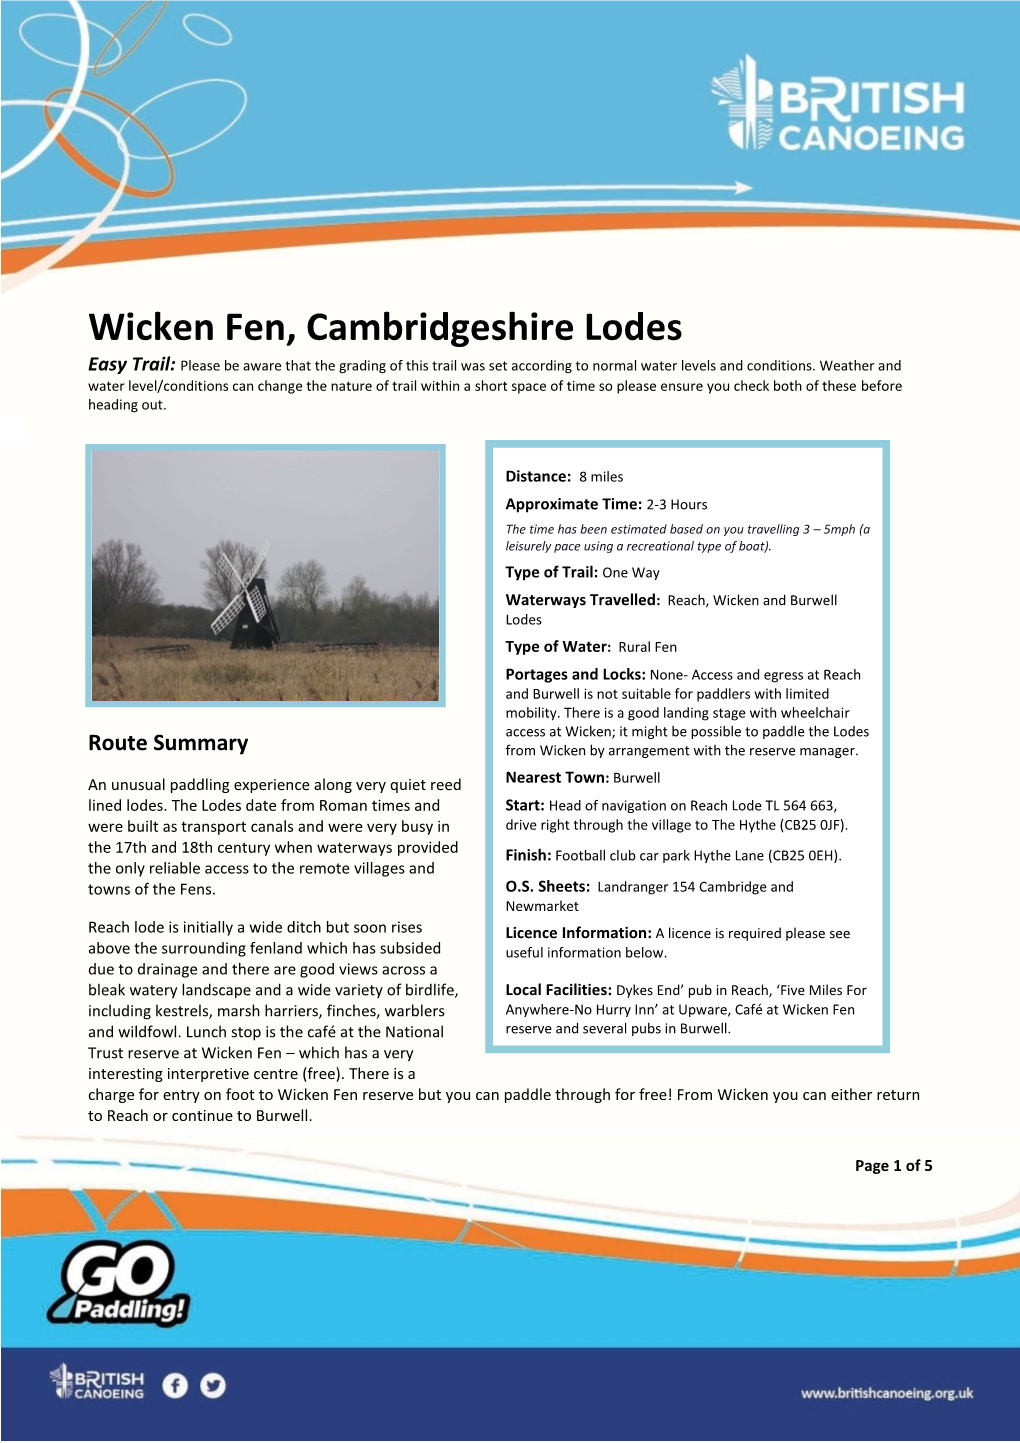 Wicken Fen, Cambridgeshire Lodes Easy Trail: Please Be Aware That the Grading of This Trail Was Set According to Normal Water Levels and Conditions